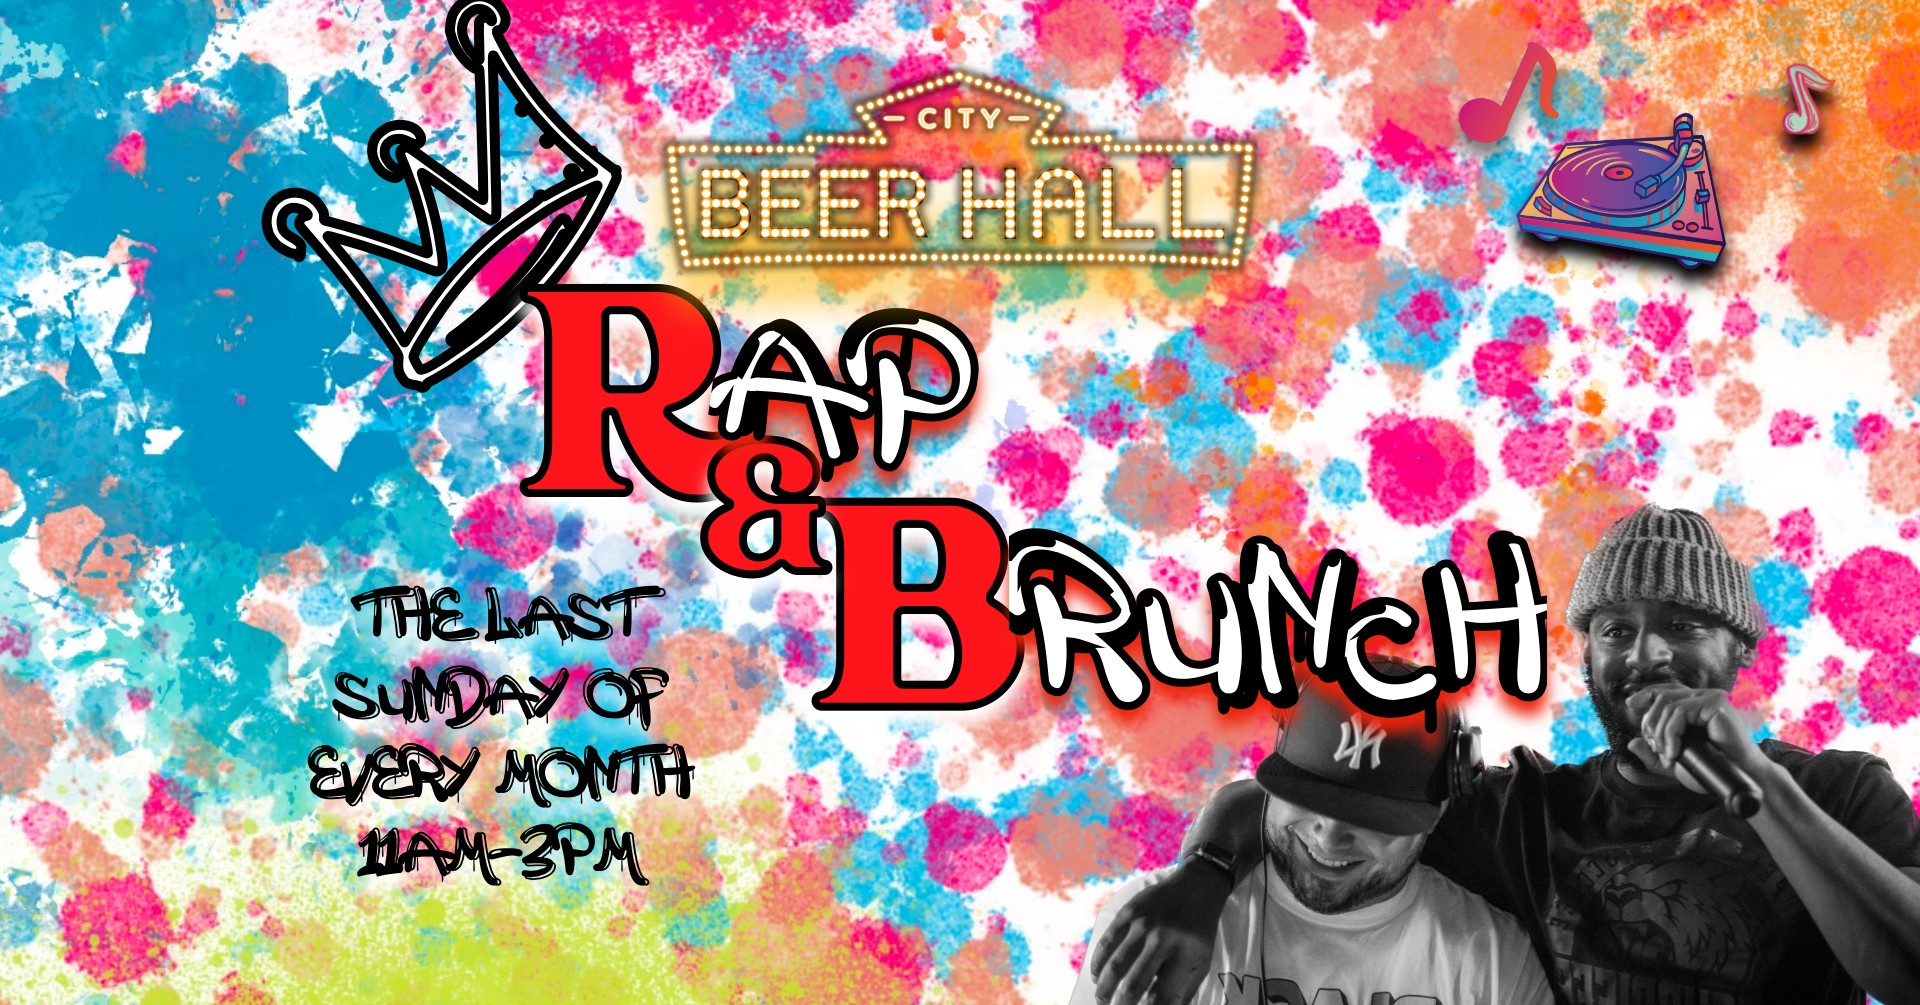 Graphic with City Beer Hall logo at top, and text Rap & Brunch, The Last Sunday of Every Month 11AM-3PM